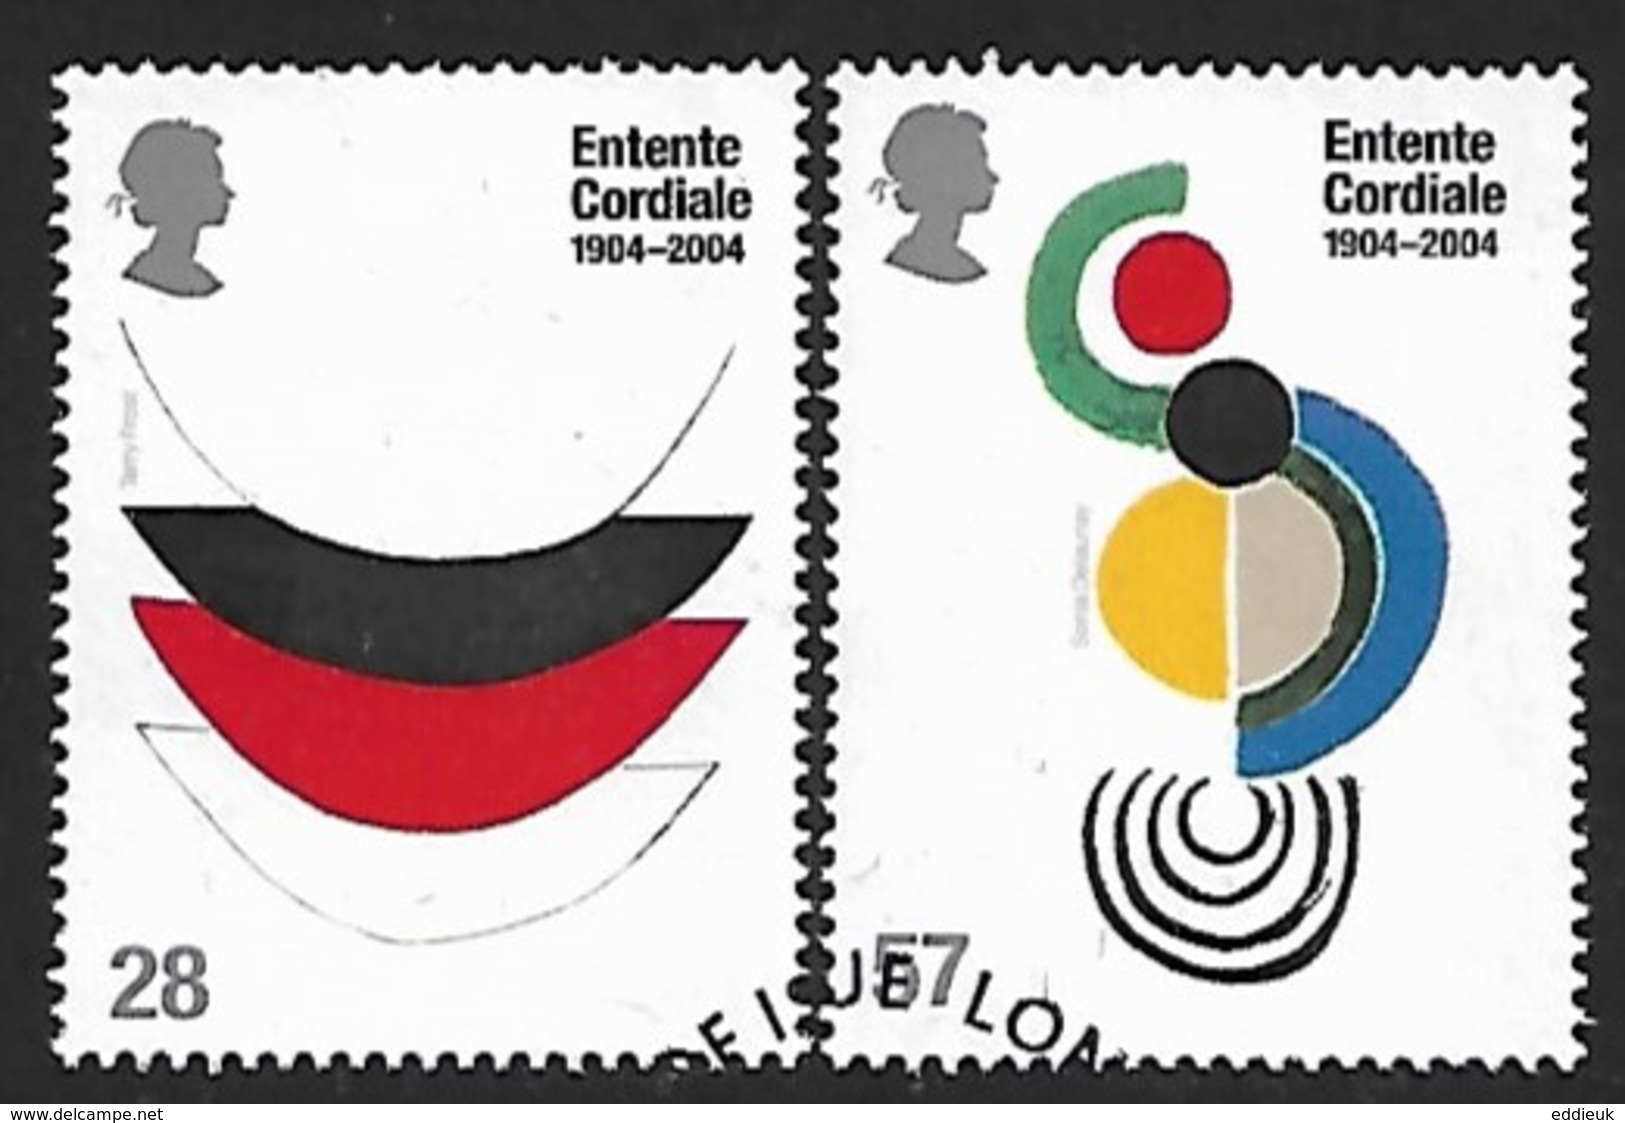 GB Set 2004 "Entente Cordial" Fine Used - Used Stamps